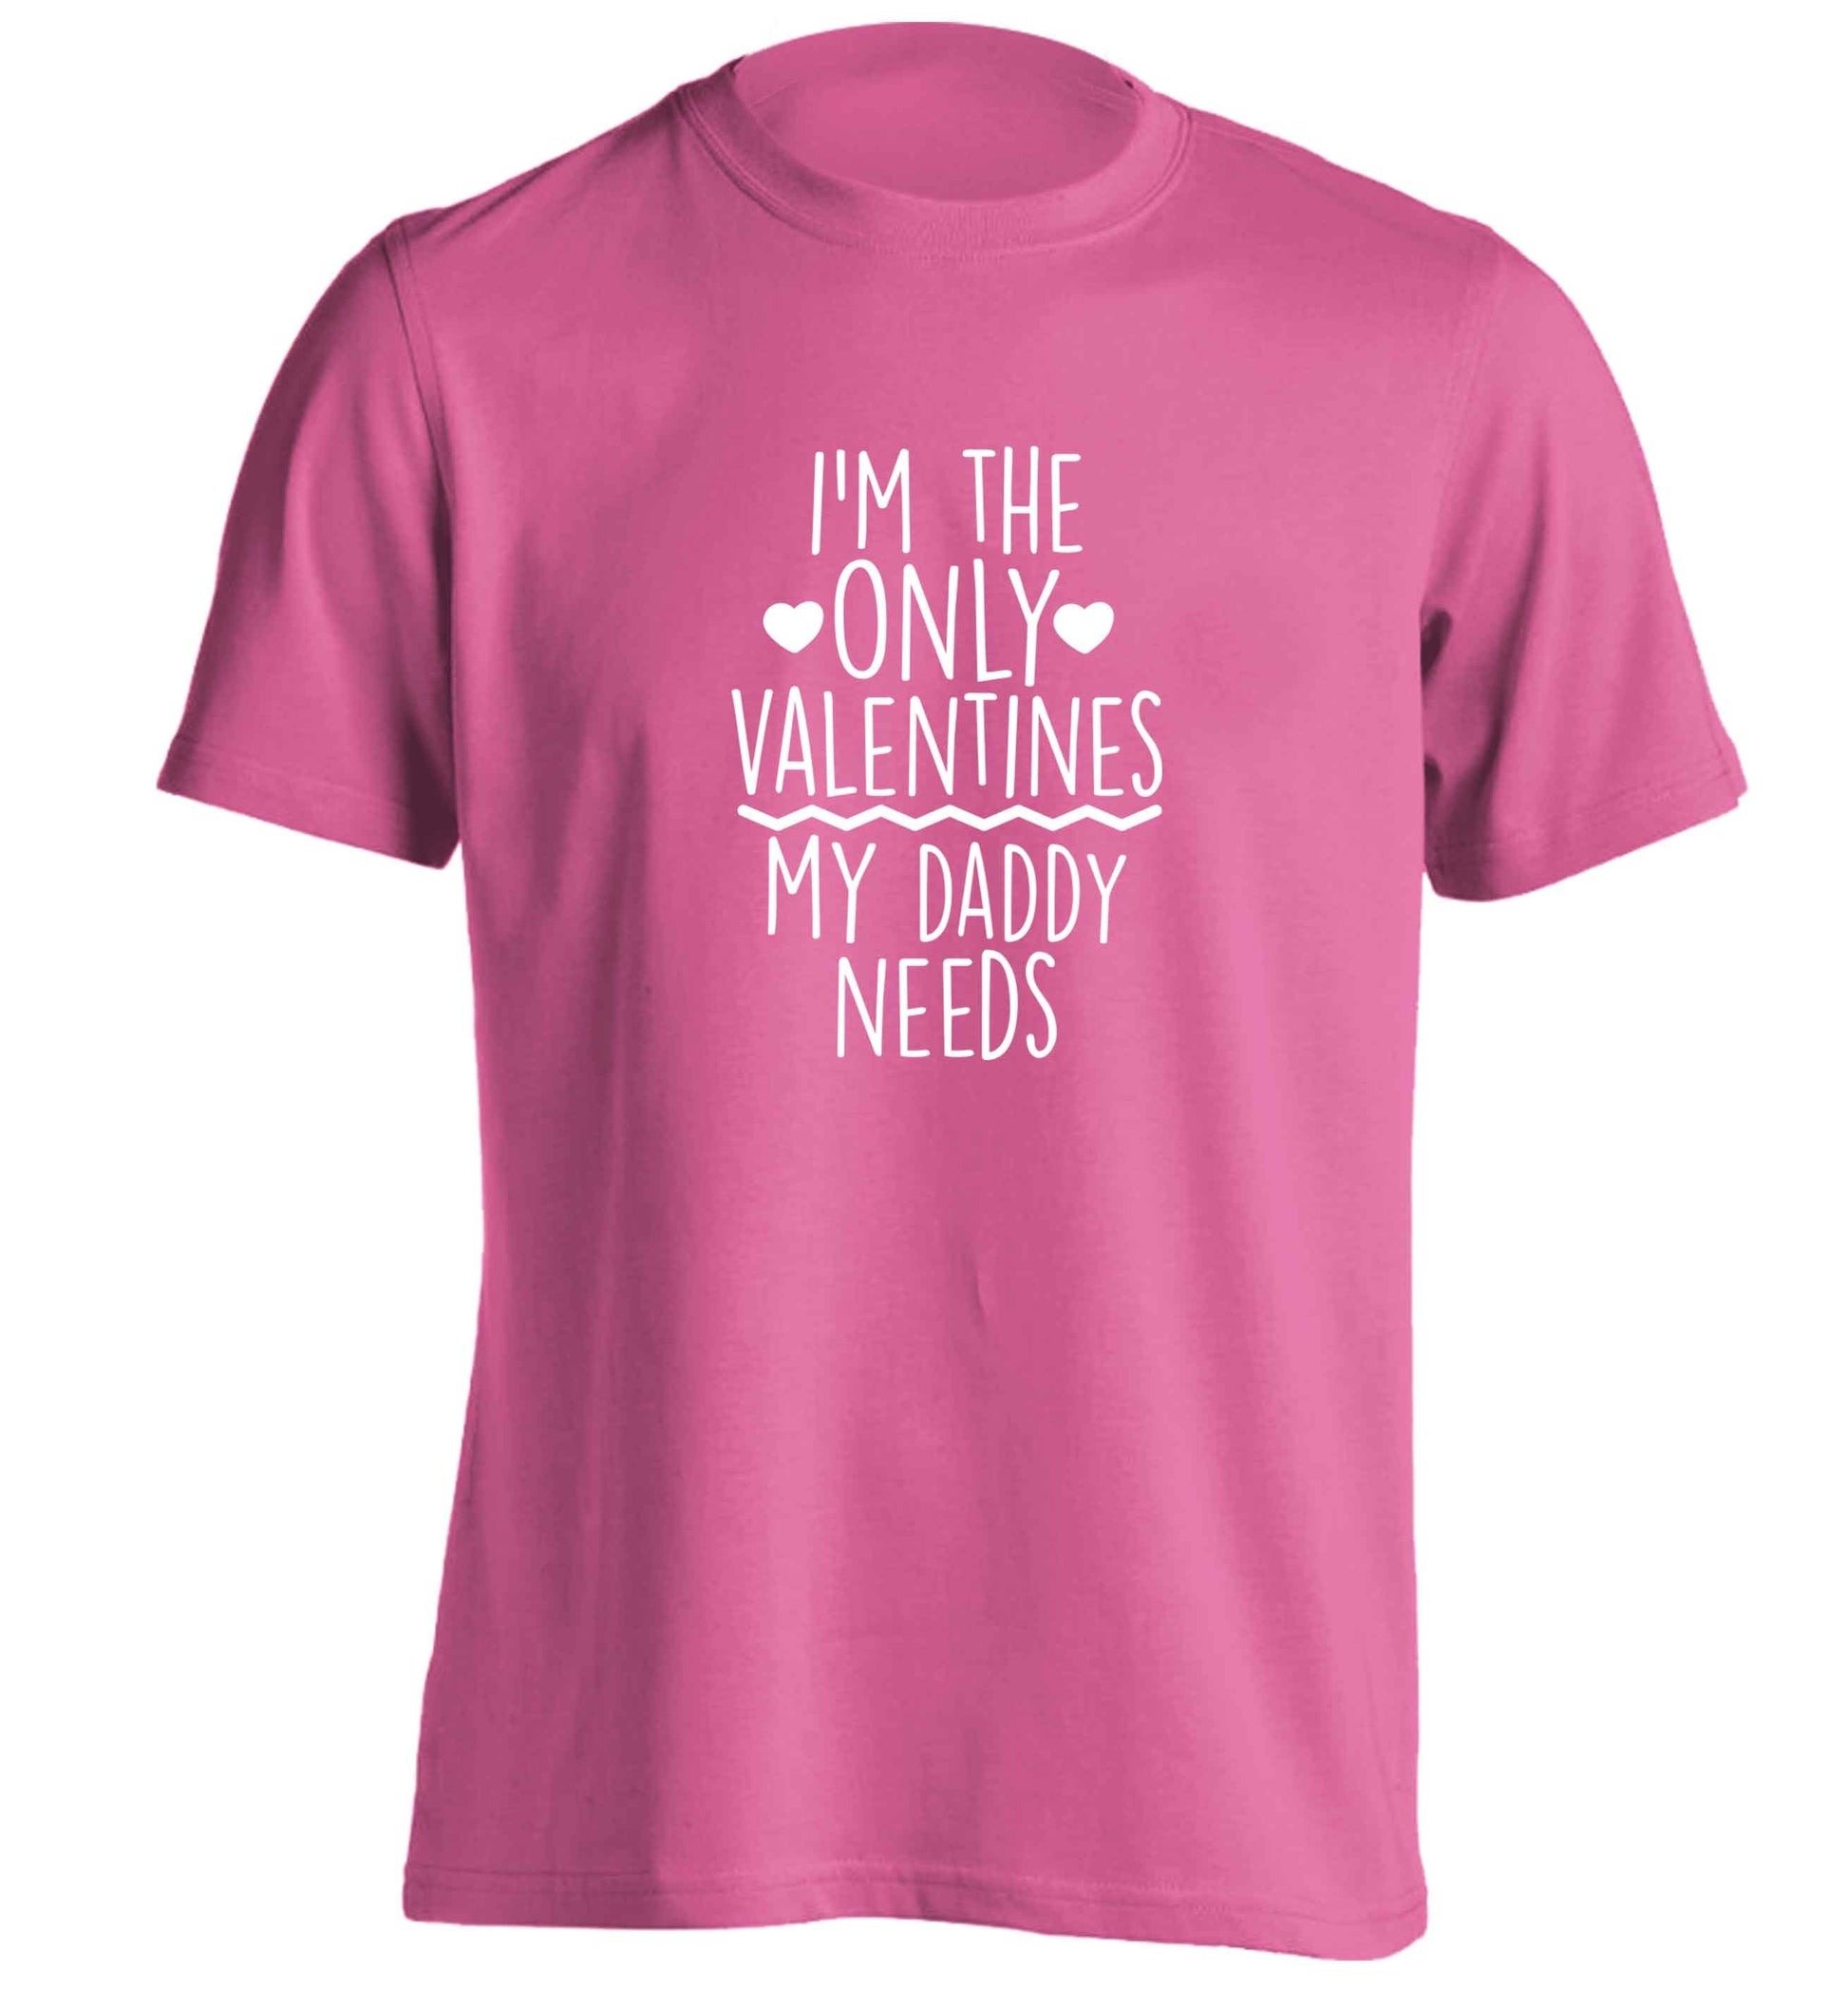 I'm the only valentines my daddy needs adults unisex pink Tshirt 2XL